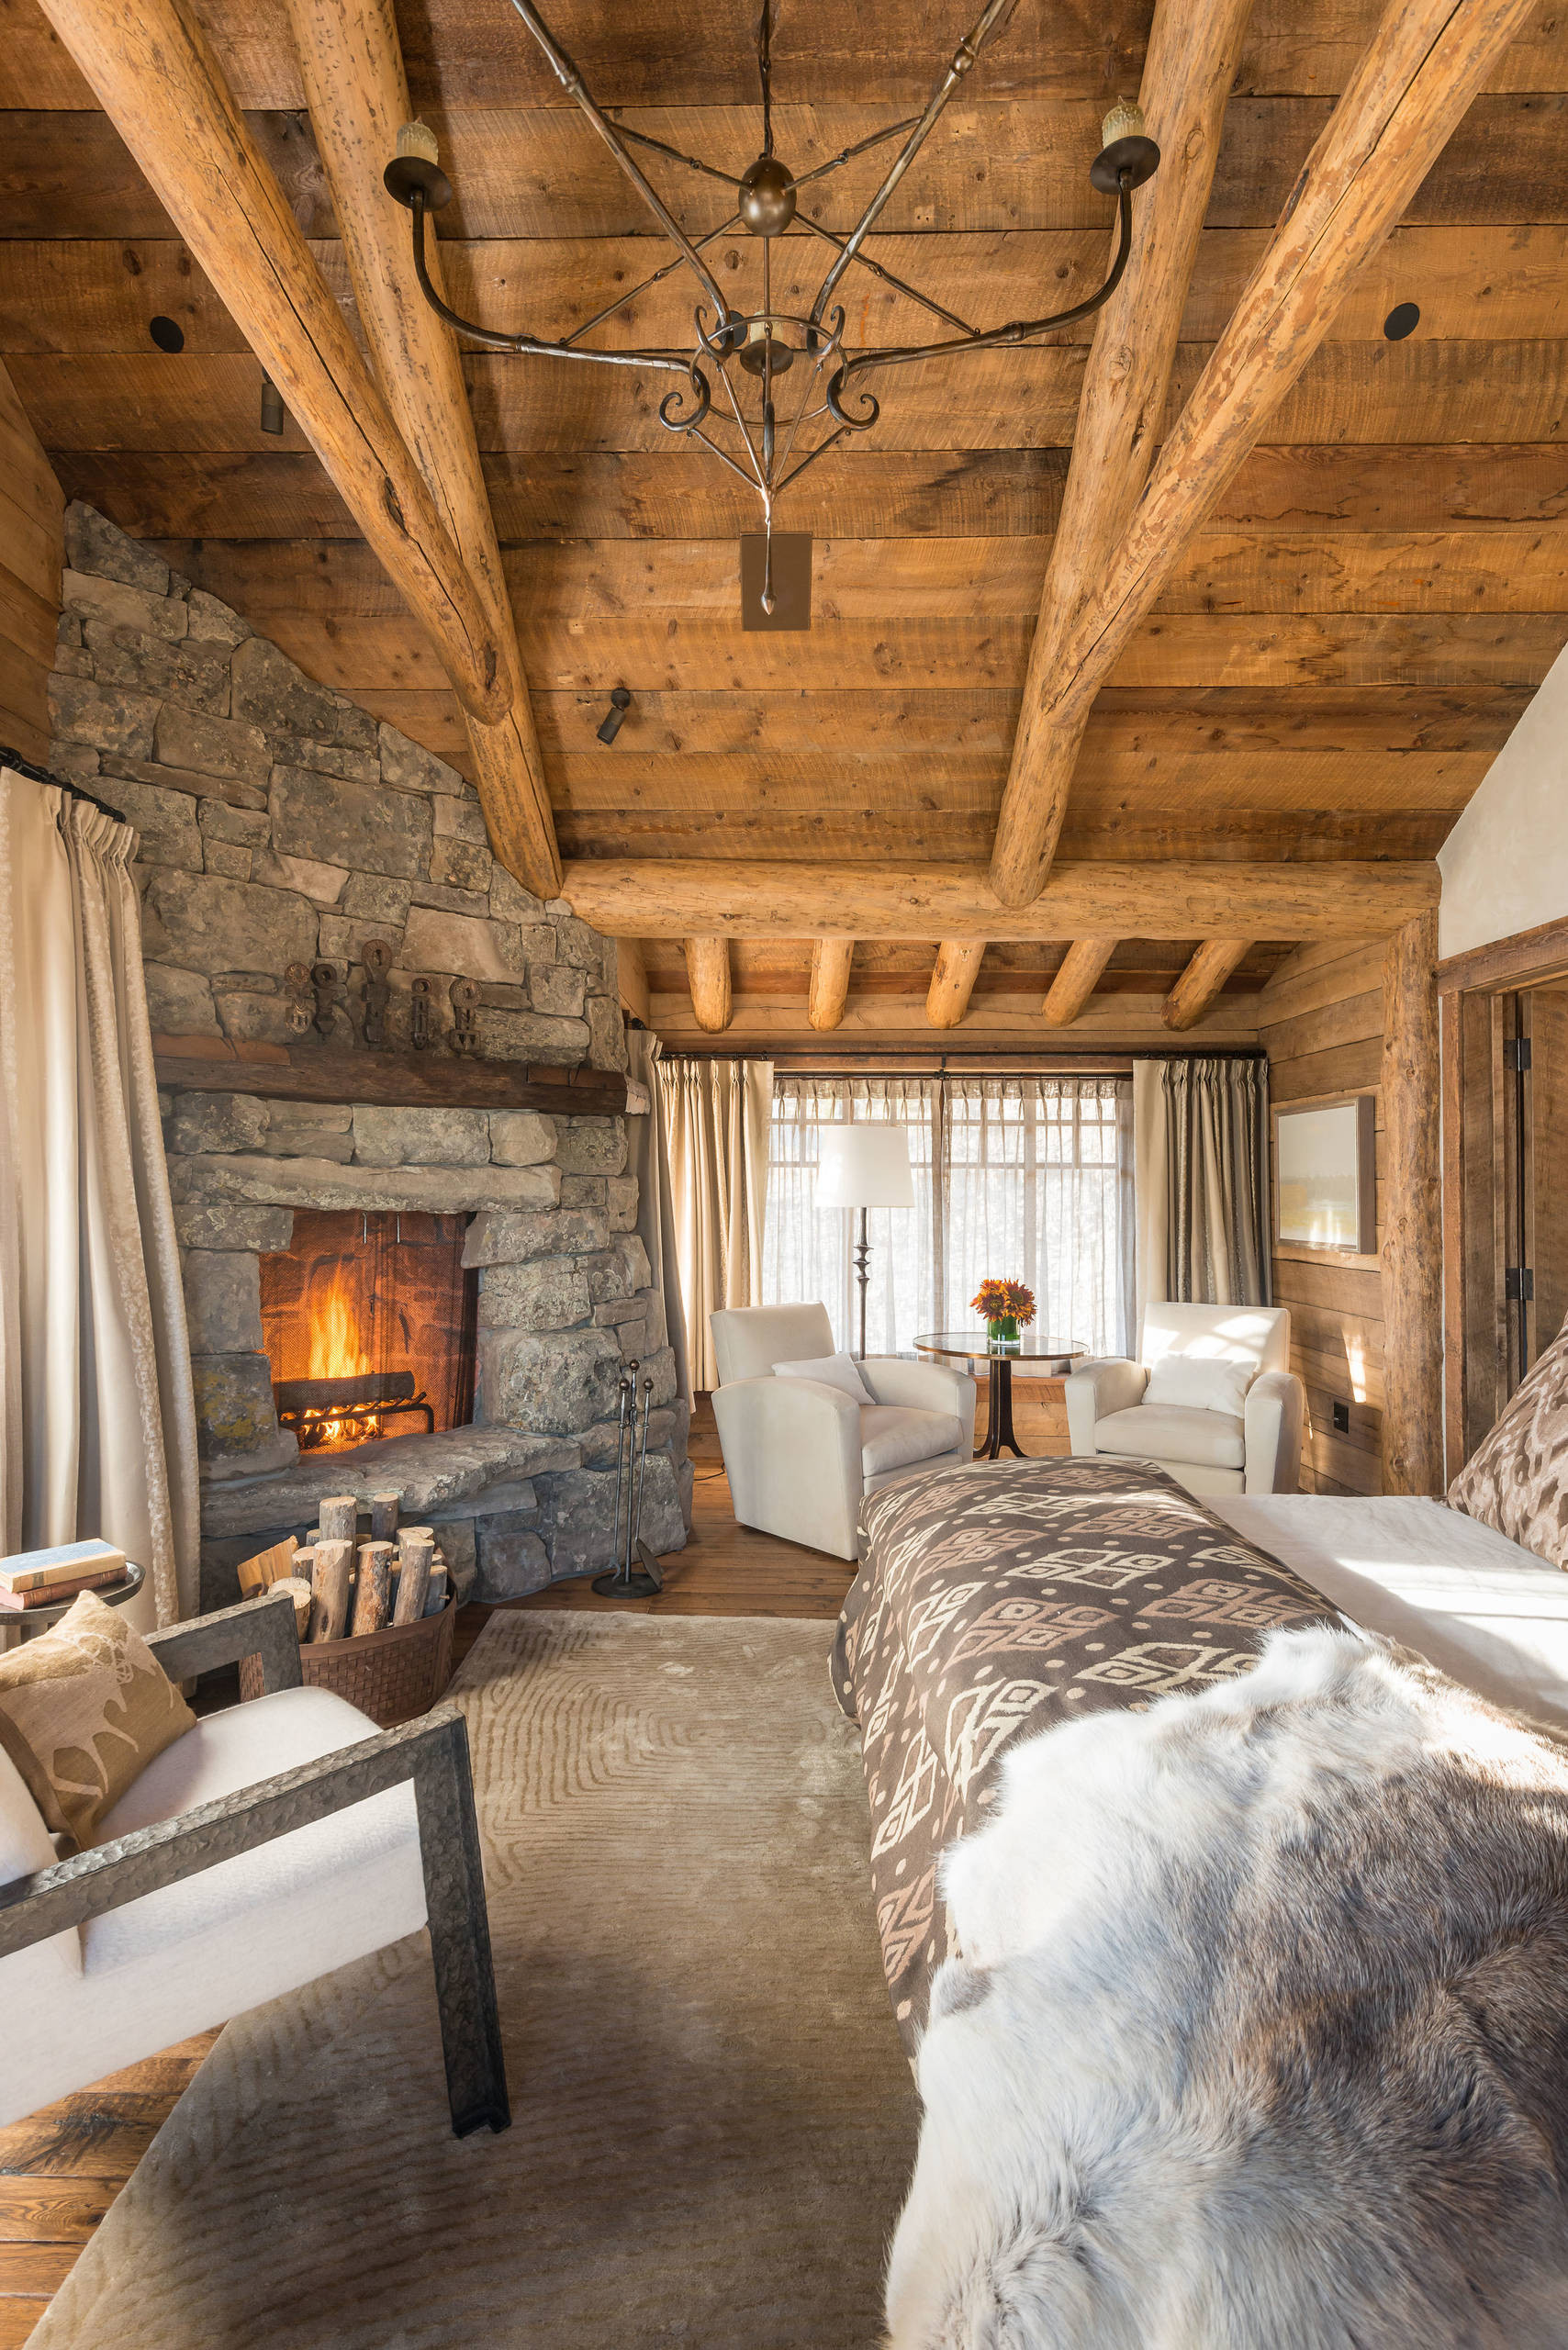 Rustic Style Bedroom
 15 Wicked Rustic Bedroom Designs That Will Make You Want Them